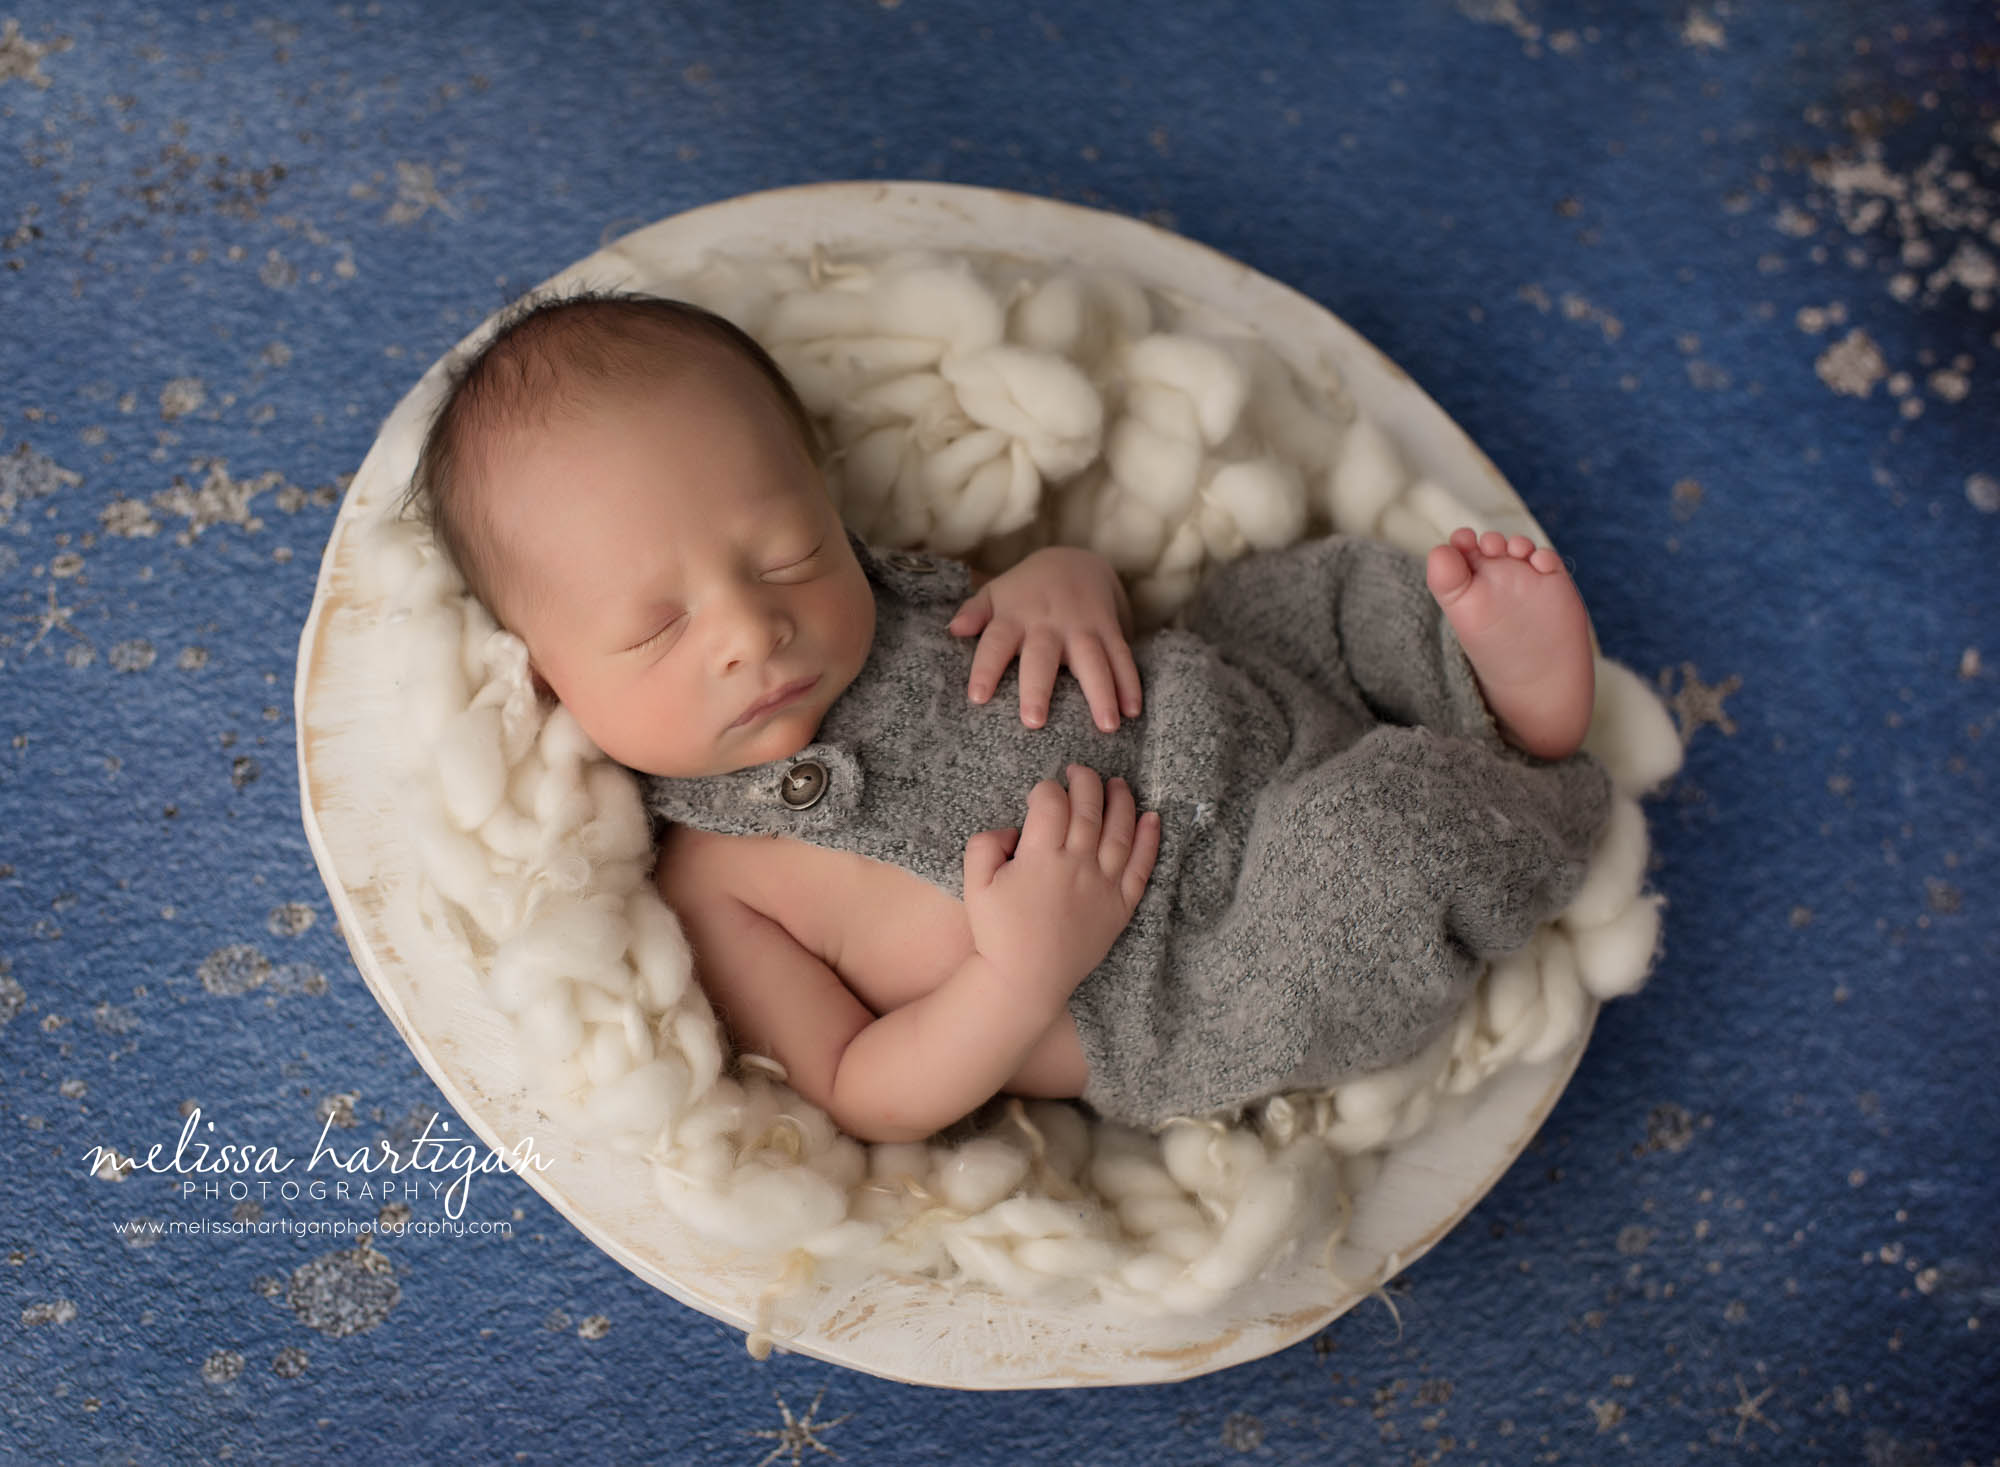 newborn baby boy posed in cream bowl with cream colored fluff wearing gray newborn boy outfit